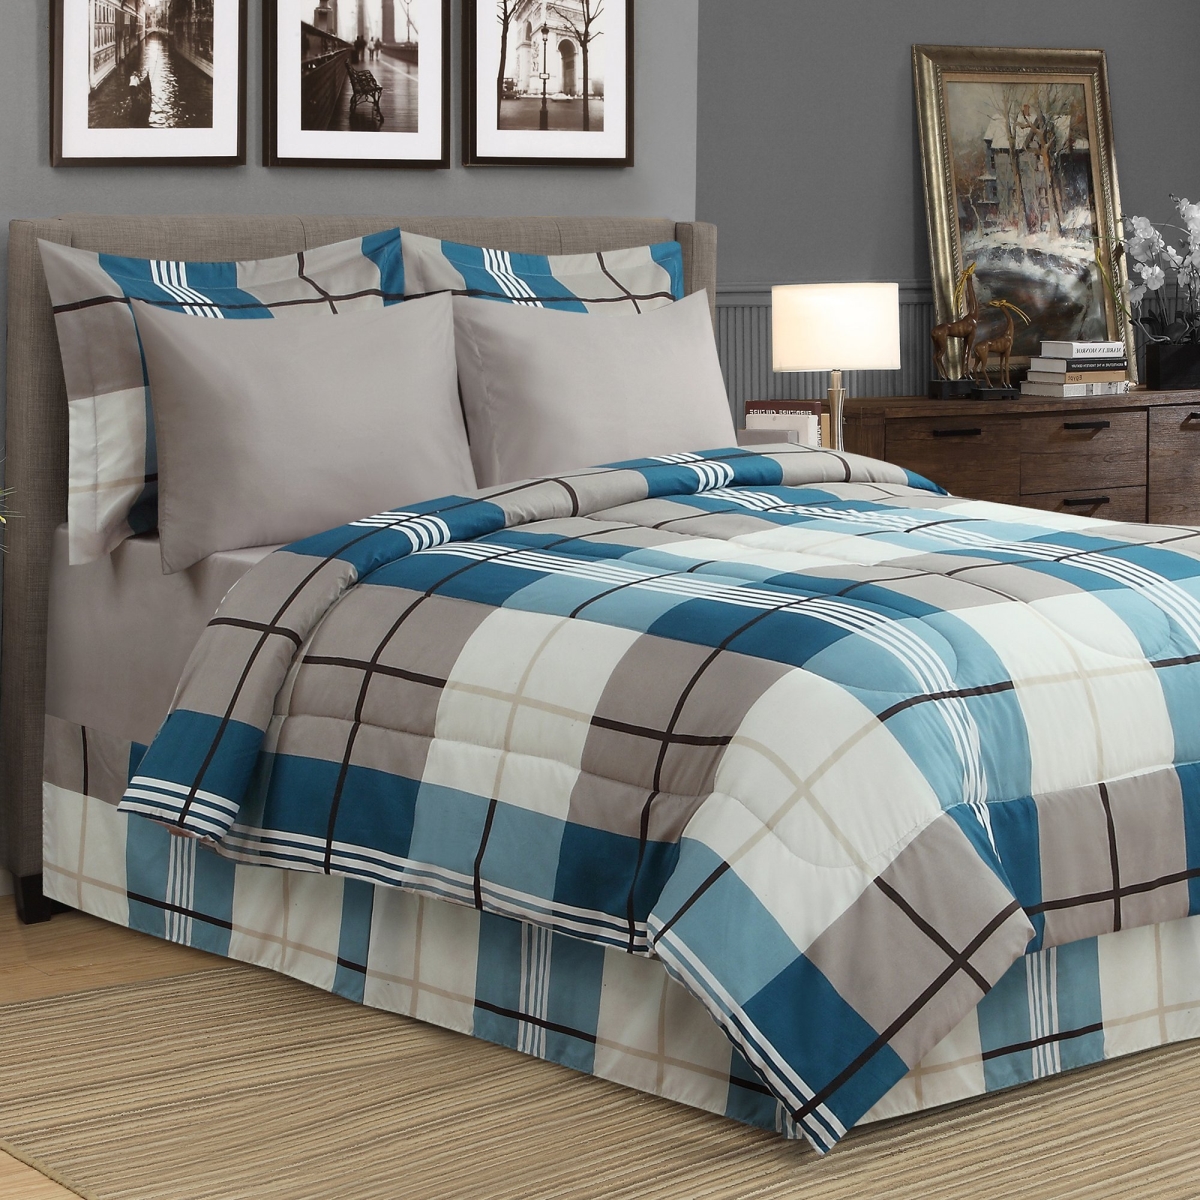 8 Piece Spencer Bed In A Bag Comforter Set - Double Size